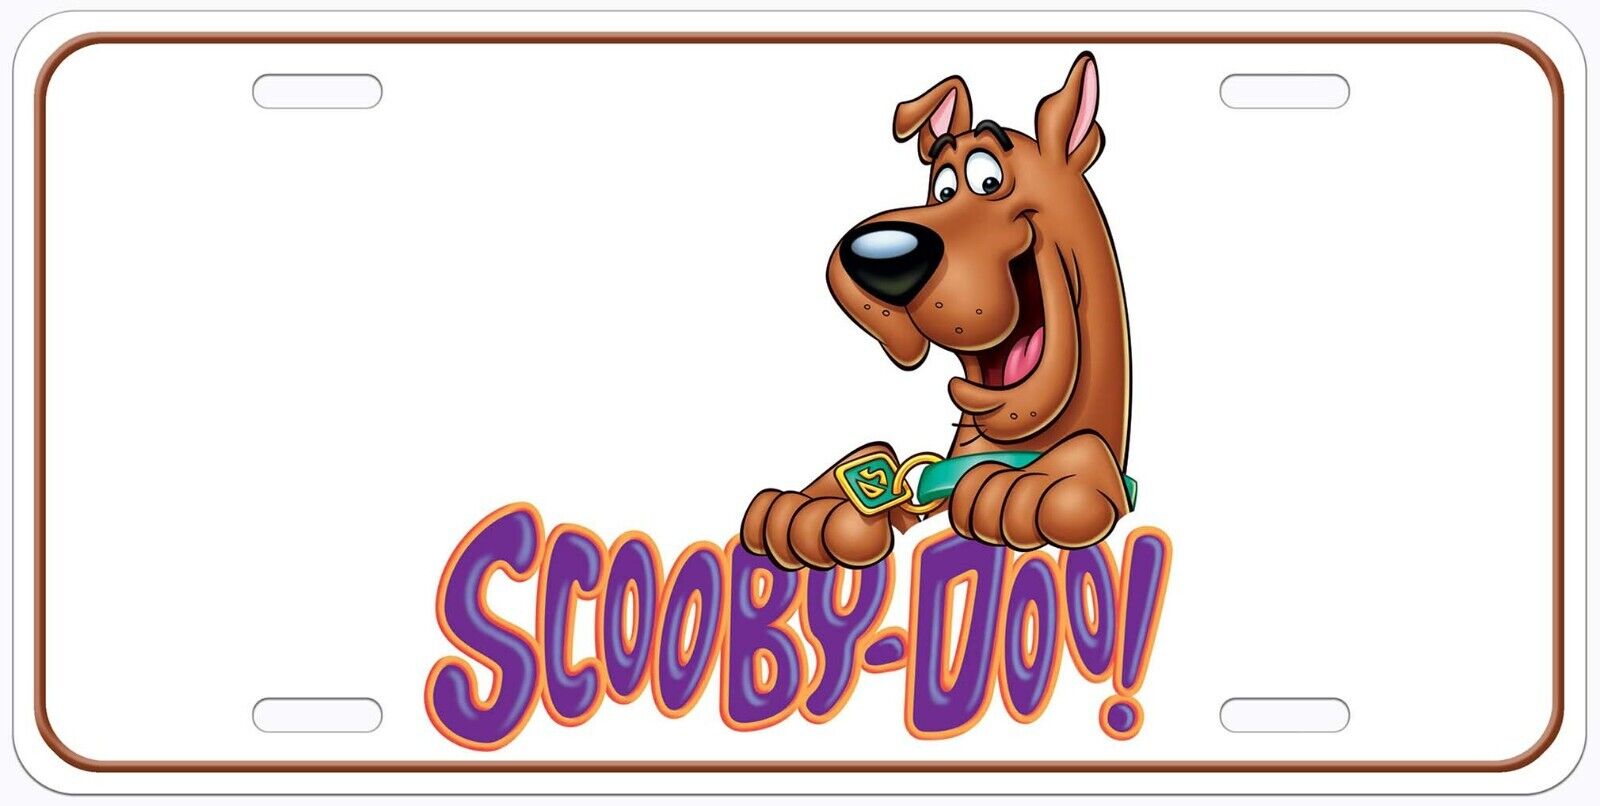 Scooby Doo Novelty Auto Car License Plate